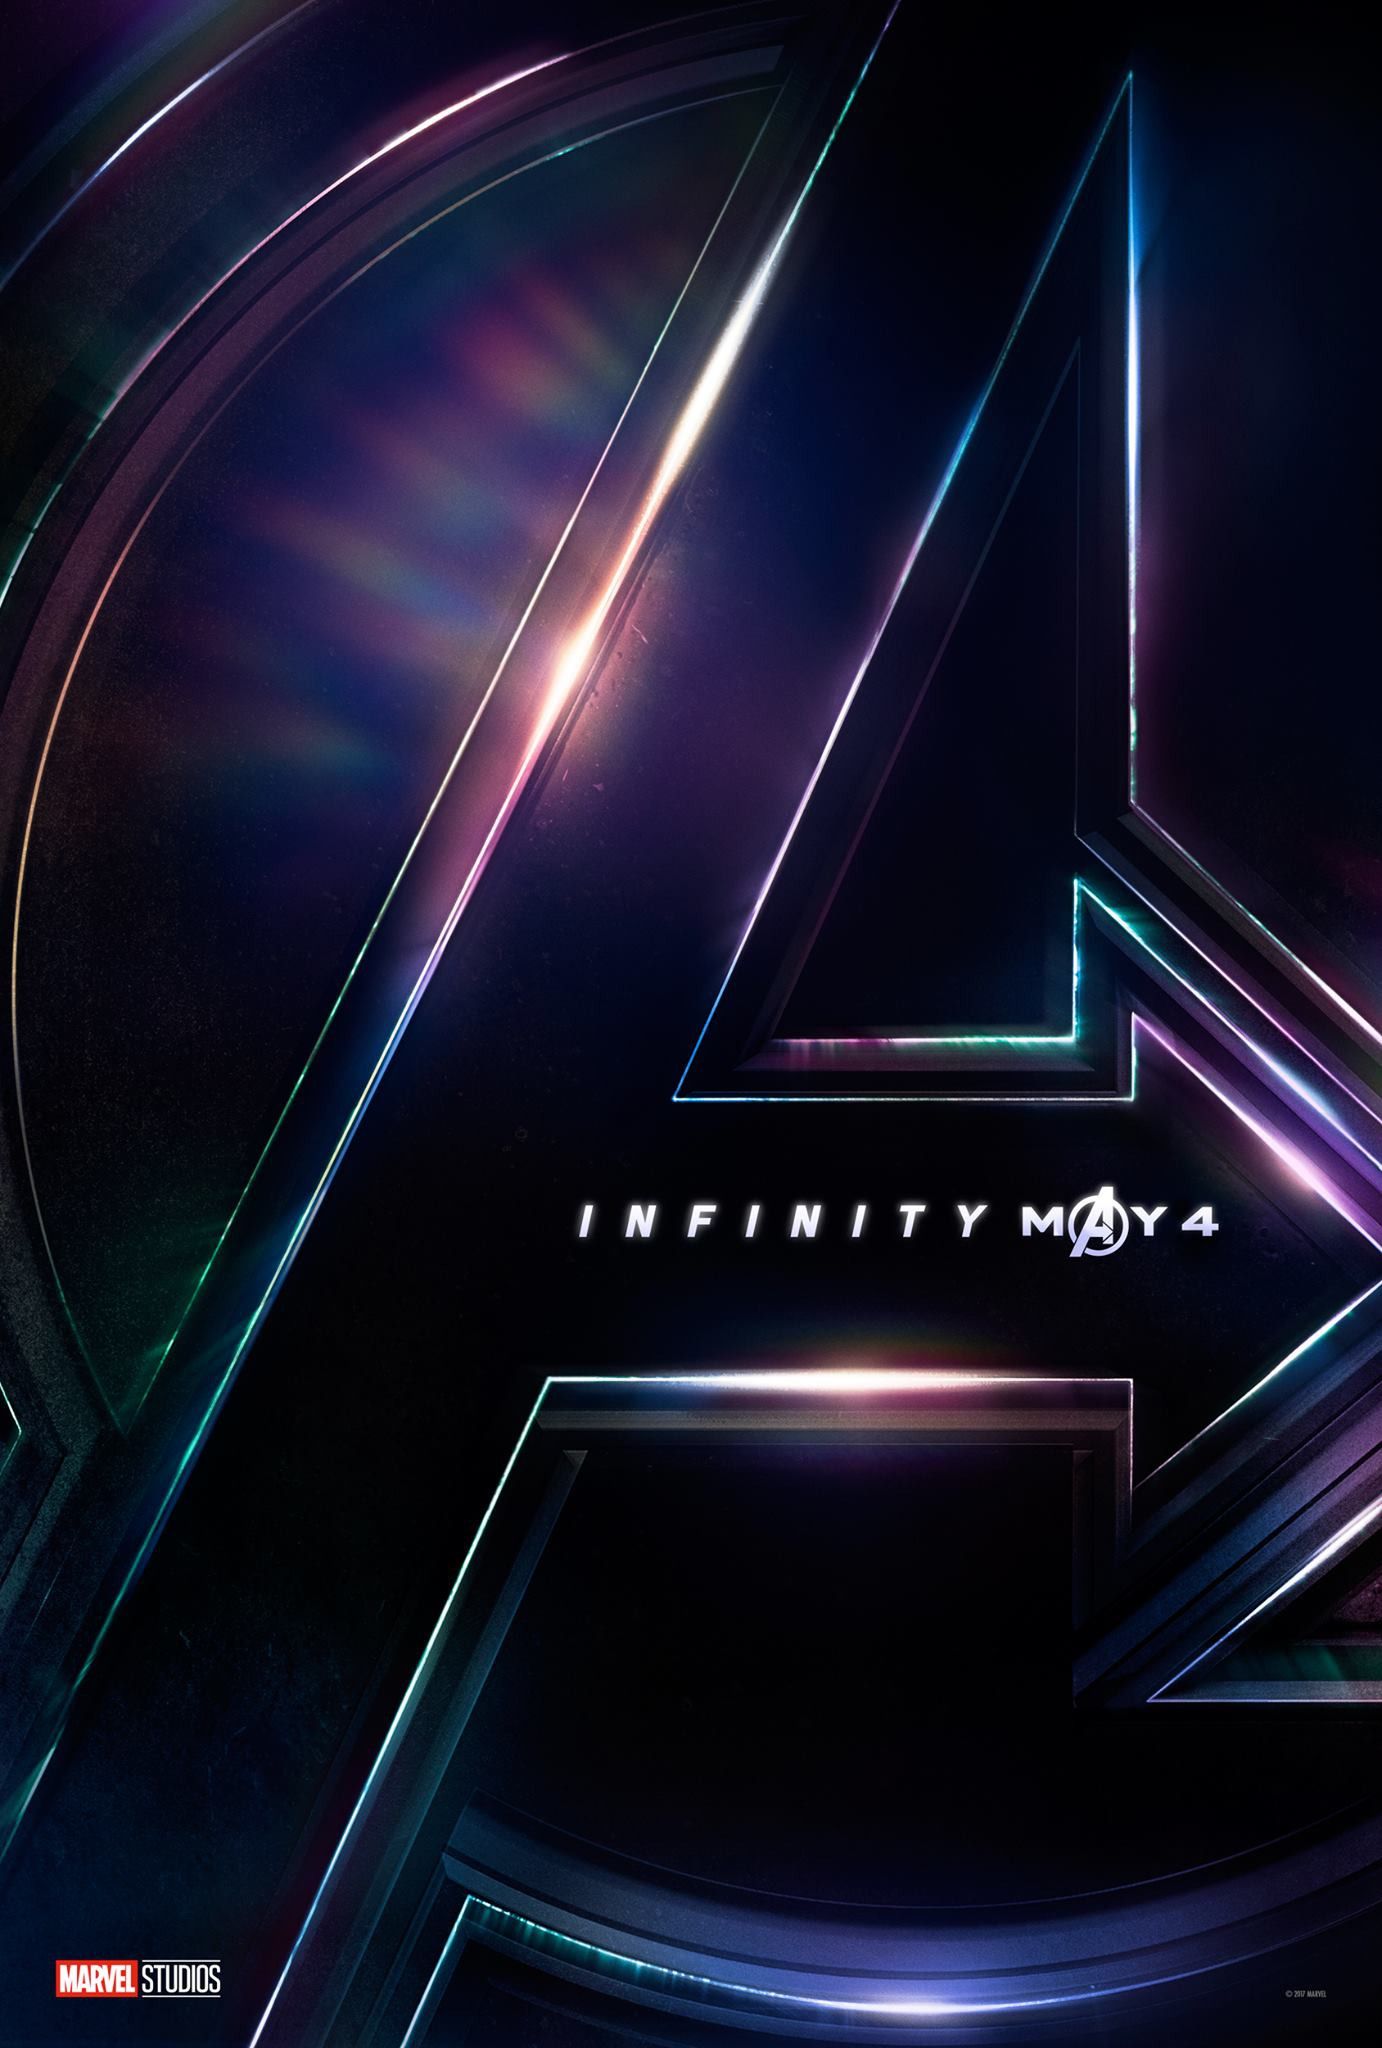 Avengers: Infinity War Set Visit Interview With The Russo Brothers